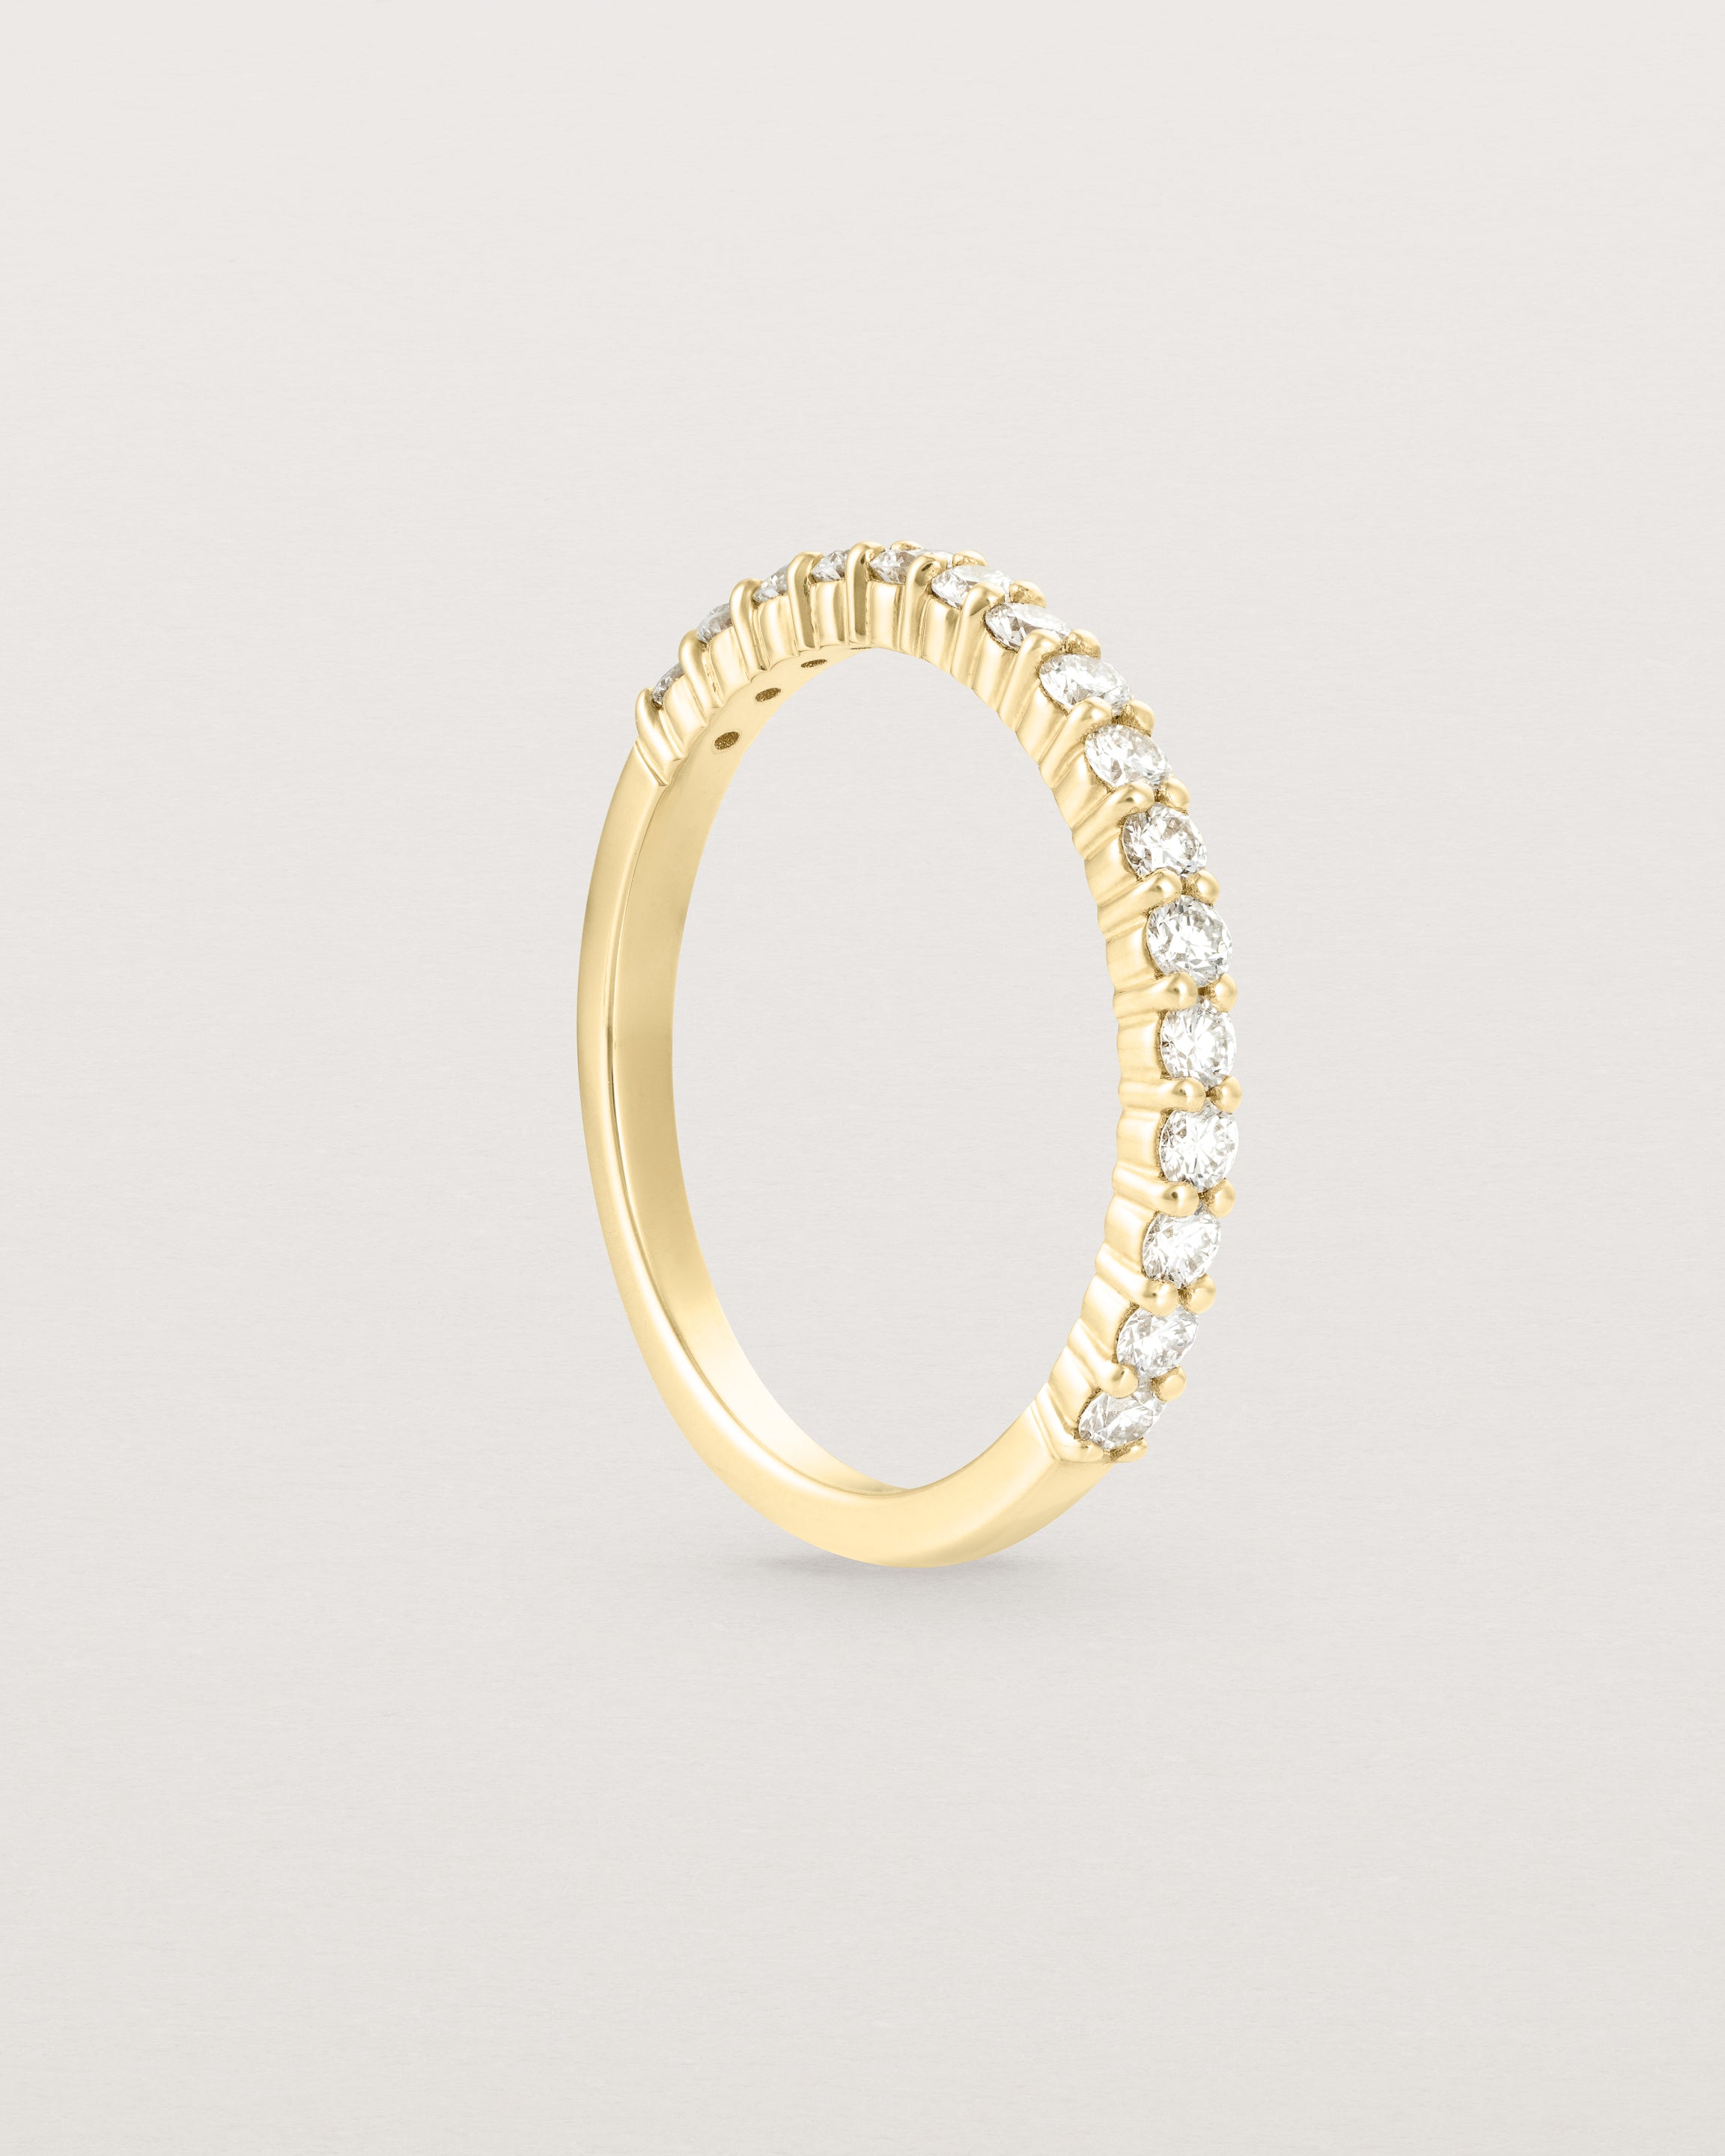 Standing view of the Demi Grace Ring | White Diamonds in yellow gold.